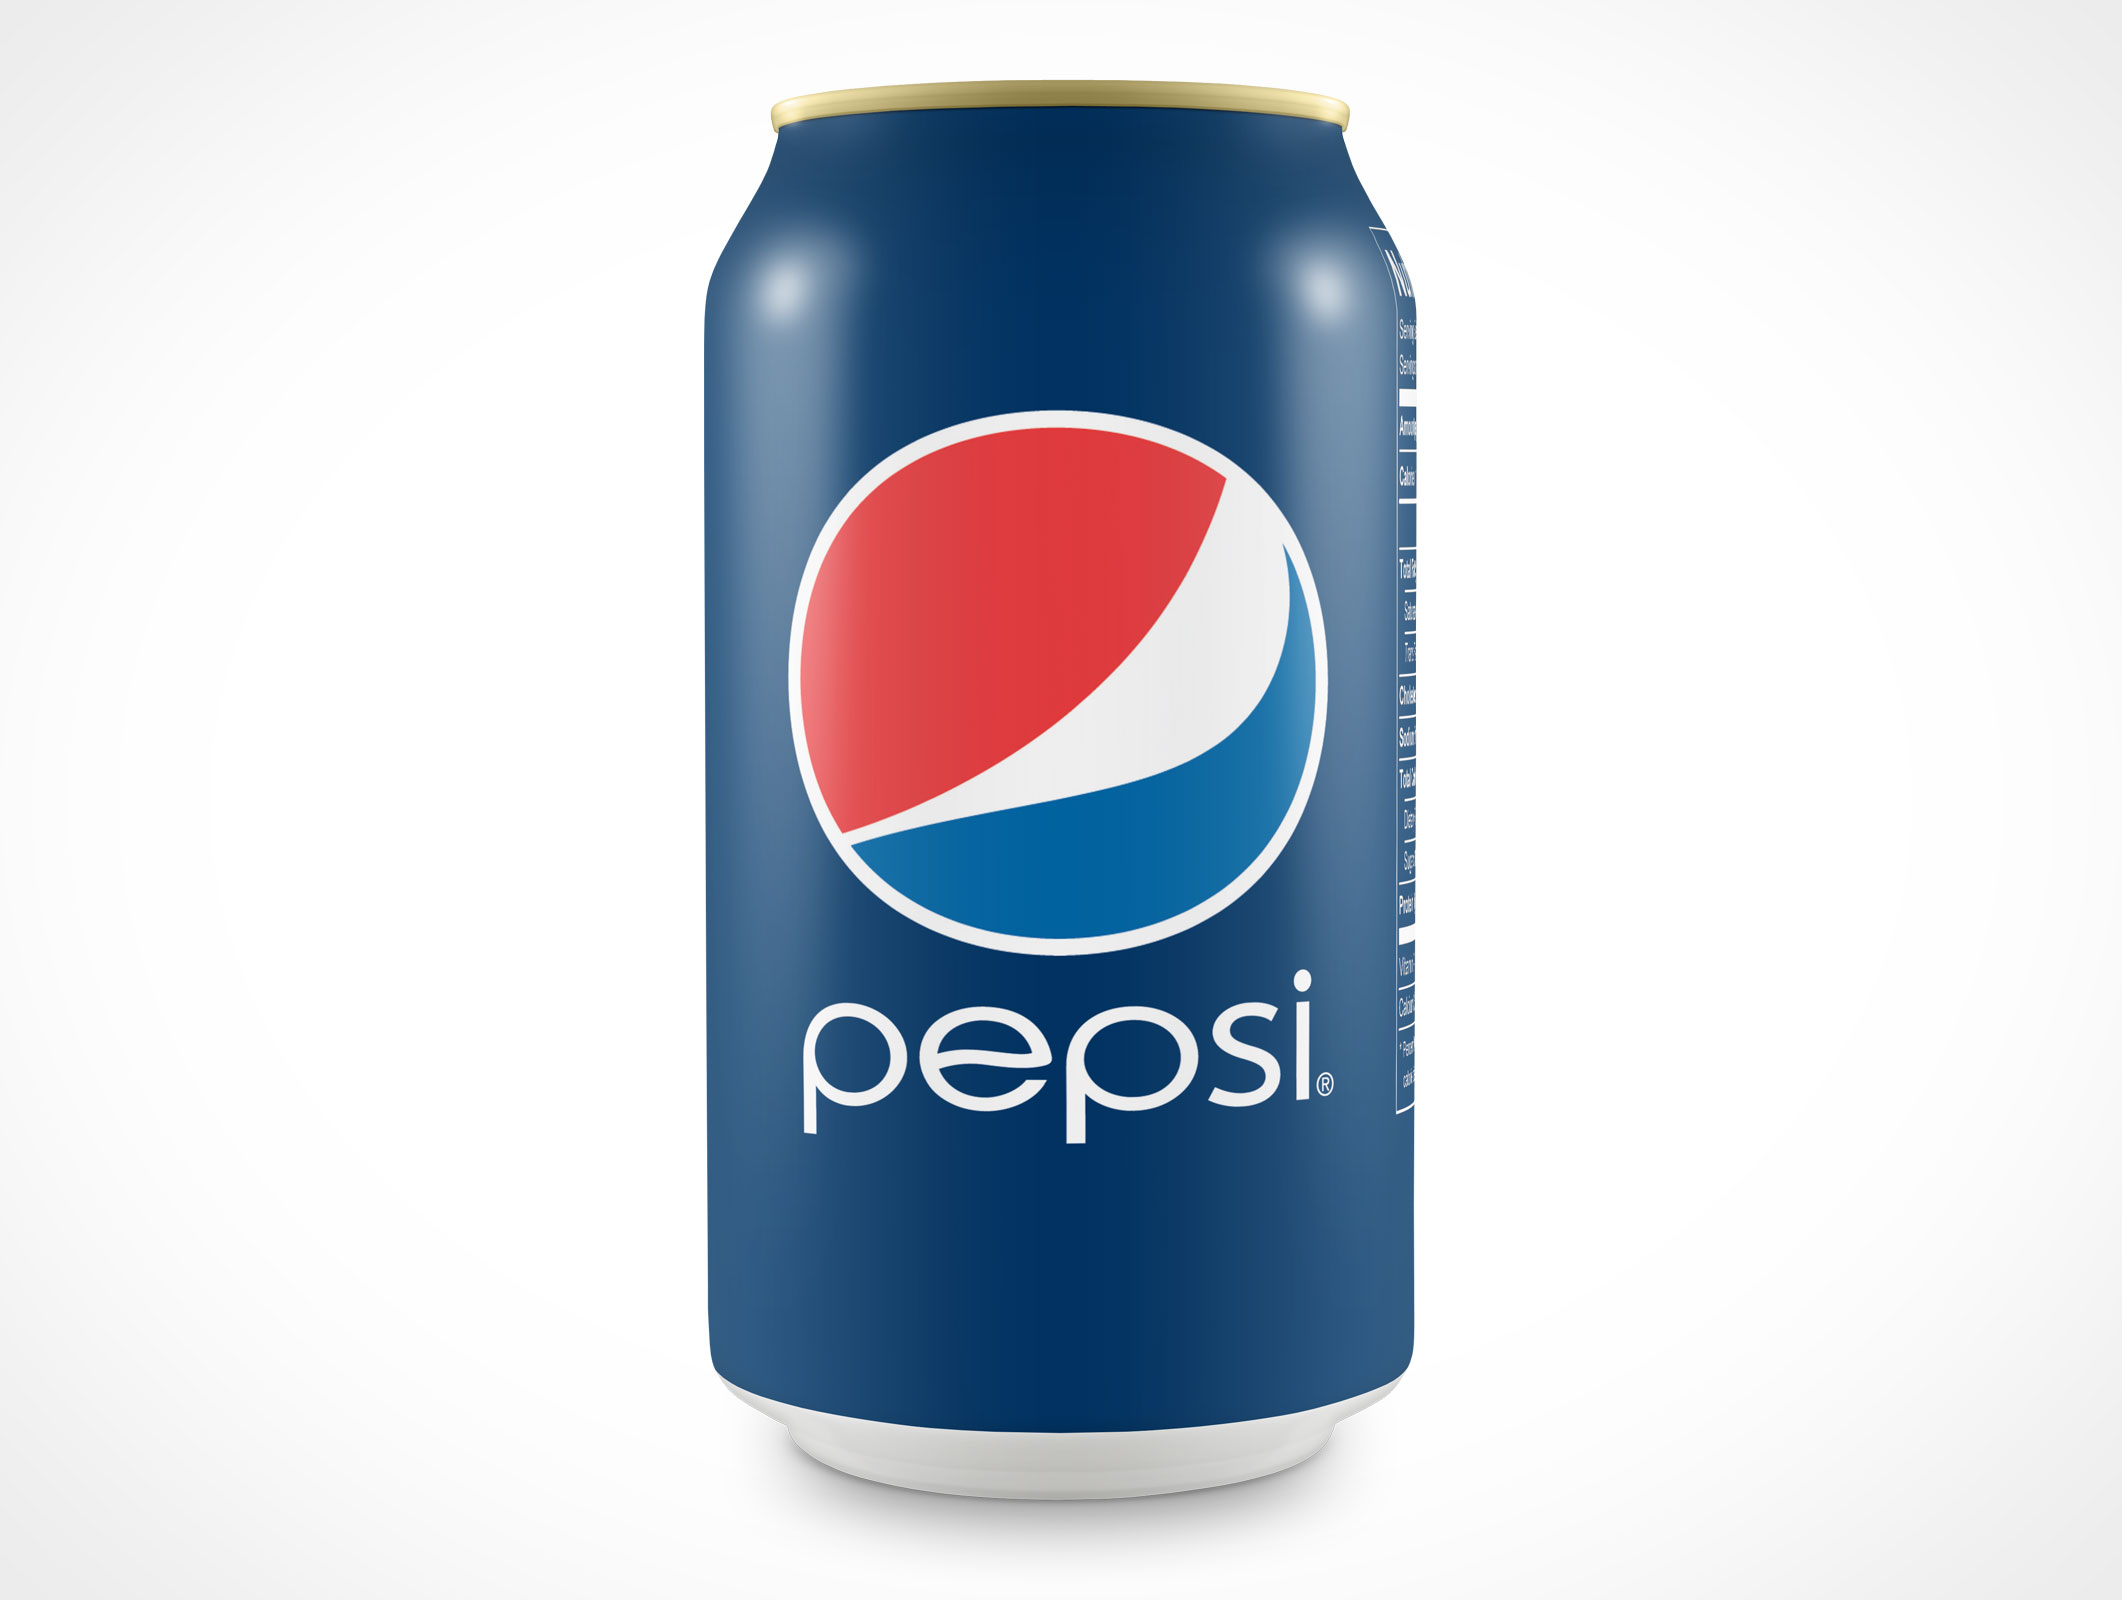 Images Of Soda Cans - ClipArt Best